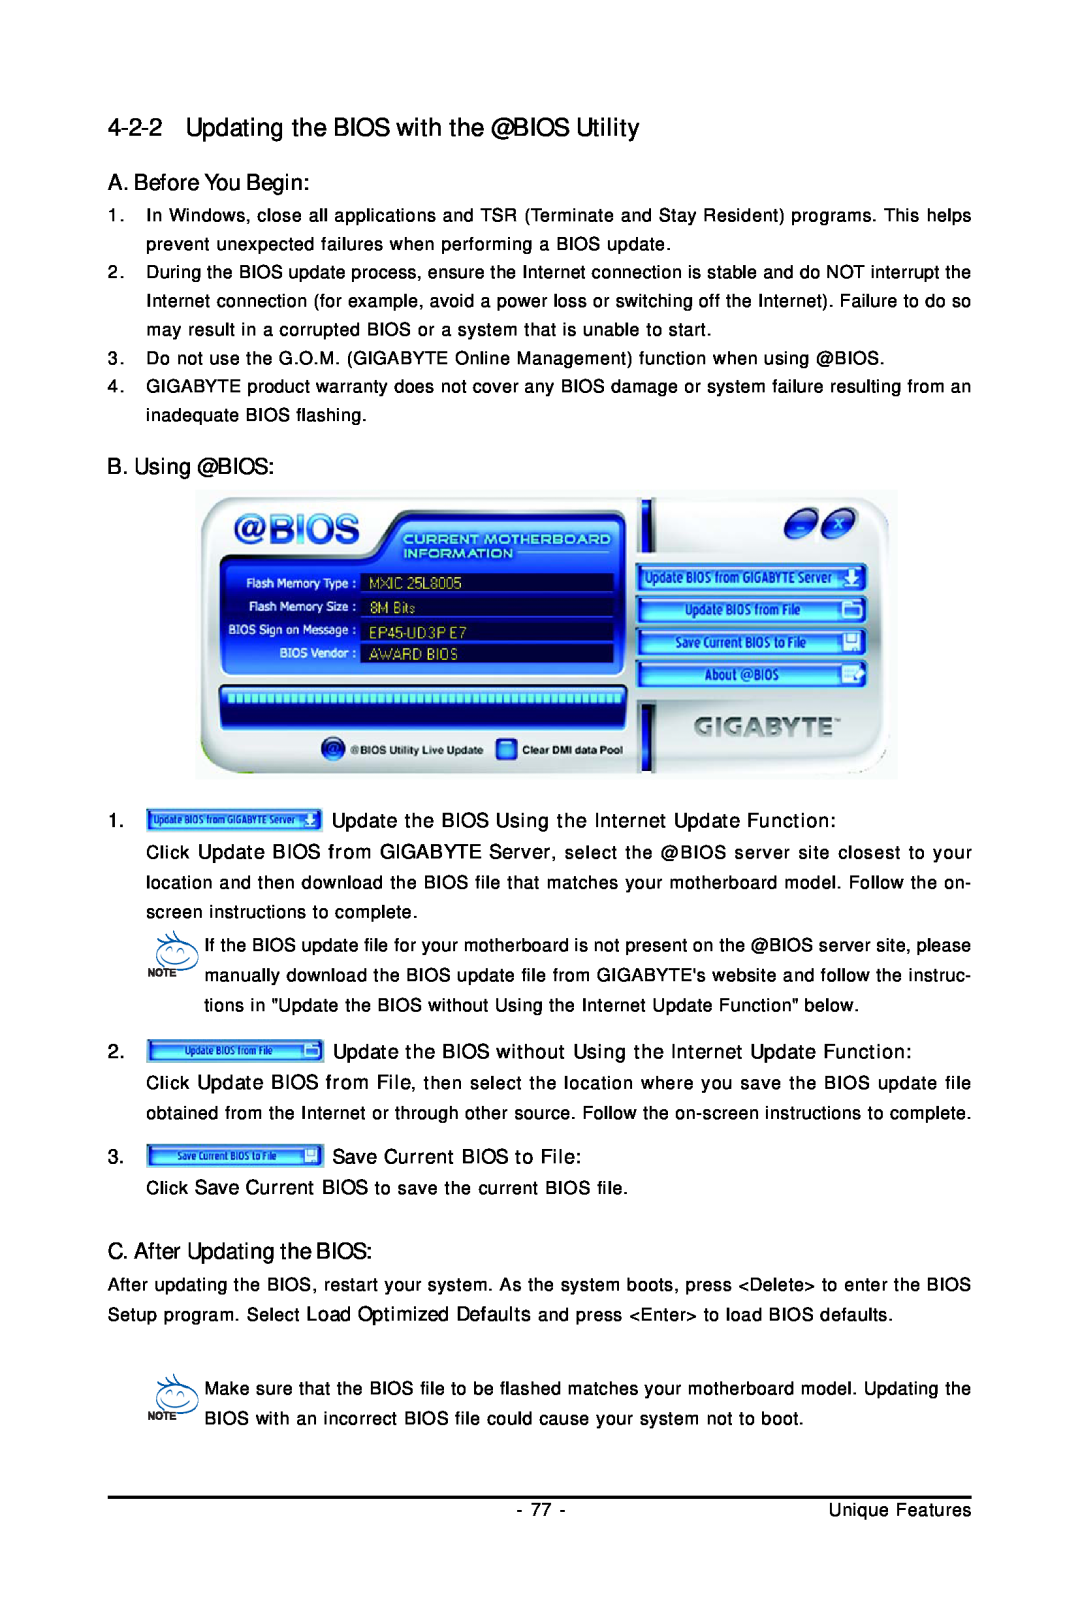 Gigabyte GA-EP45-UD3P user manual Updating the BIOS with the @BIOS Utility, B. Using @BIOS, C. After Updating the BIOS 